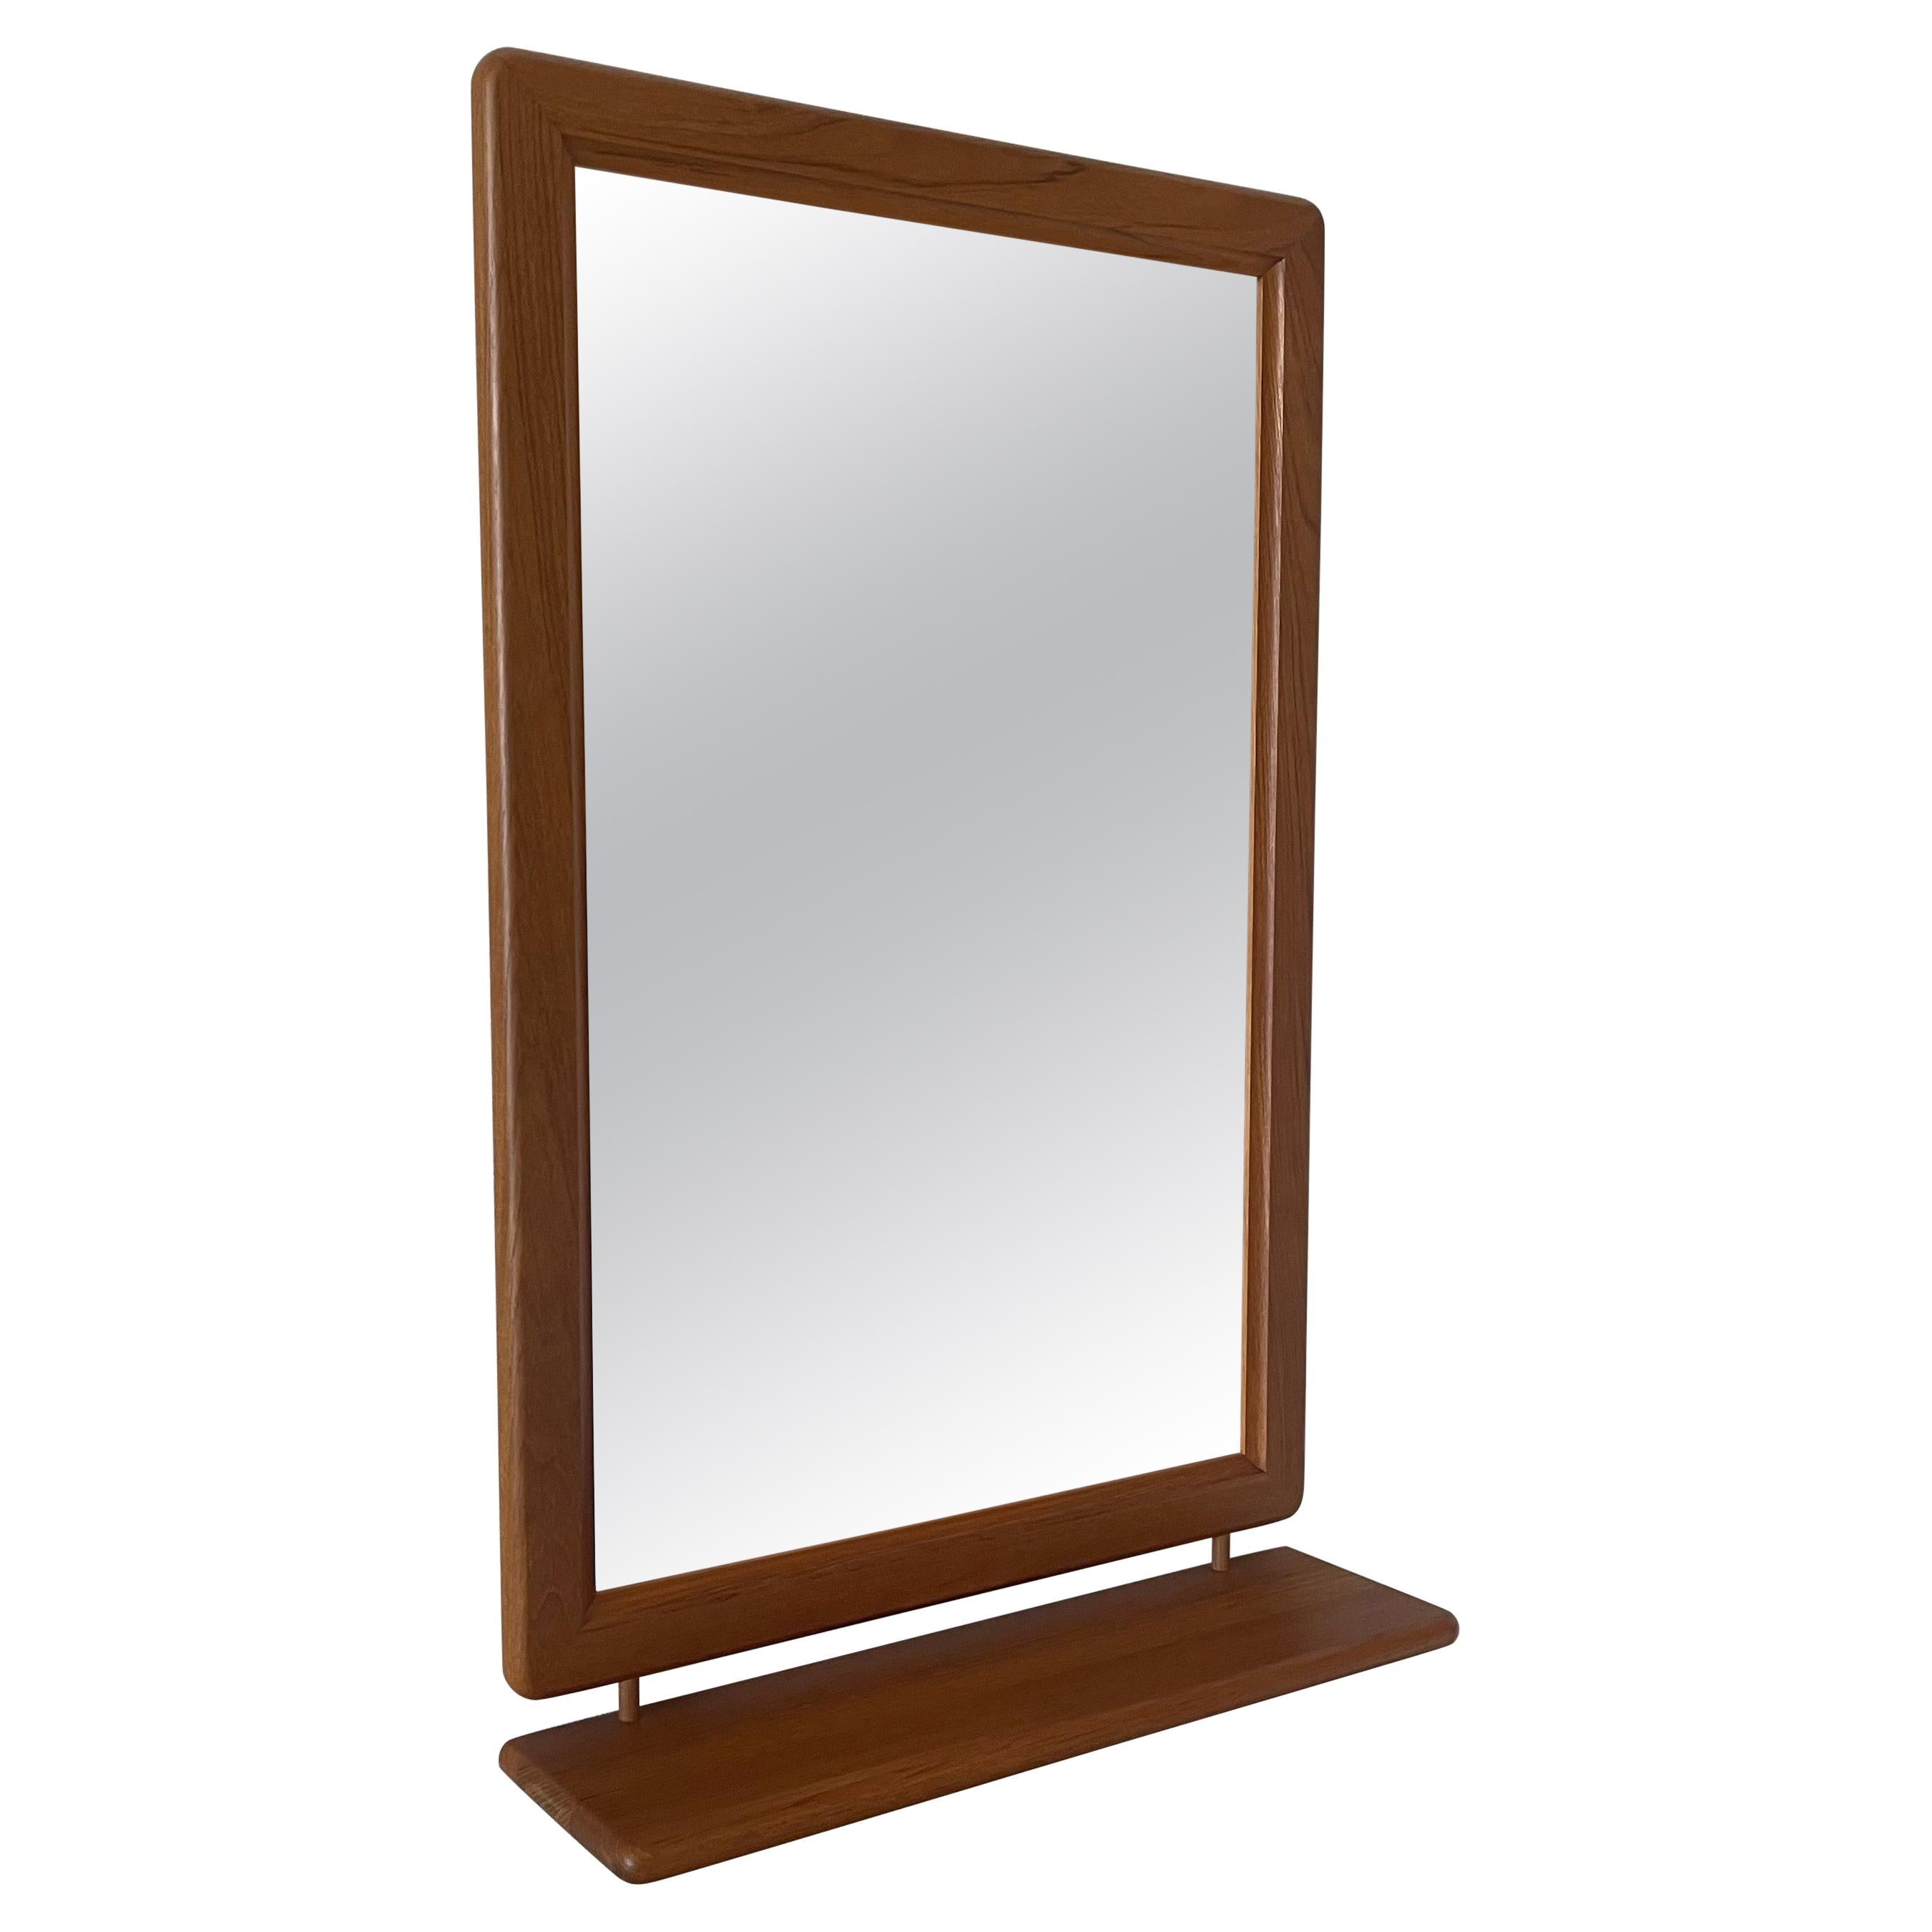 Danish Modern Solid Teak Mirror with Rounded Corners and Shelf